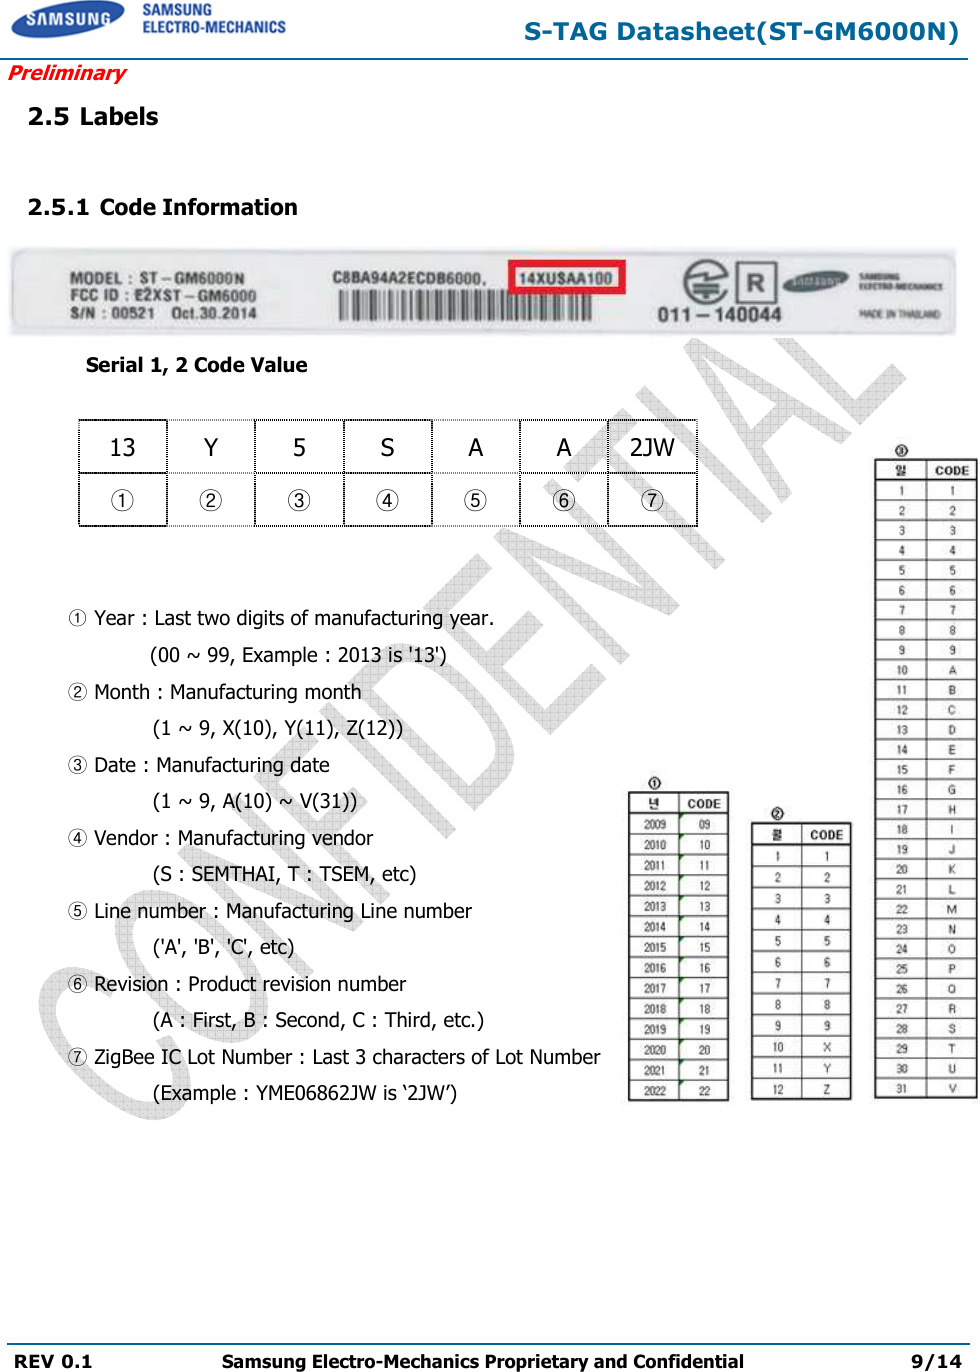  S-TAG Datasheet(ST-GM6000N) Preliminary REV 0.1  Samsung Electro-Mechanics Proprietary and Confidential 9/14   2.5 Labels  2.5.1 Code Information     Serial 1, 2 Code Value    13  Y  5  S  A  A  2JW ① ② ③ ④ ⑤ ⑥ ⑦   ① Year : Last two digits of manufacturing year.               (00 ~ 99, Example : 2013 is &apos;13&apos;)  Month : Manufacturing month②     (1 ~ 9, X(10), Y(11), Z(12))  Date : Manufacturing date③      (1 ~ 9, A(10) ~ V(31))  Vendor : Manufacturing vendor④     (S : SEMTHAI, T : TSEM, etc)  Line number : Manufacturing Line number⑤     (&apos;A&apos;, &apos;B&apos;, &apos;C&apos;, etc)  Revision : Product revision number⑥     (A : First, B : Second, C : Third, etc.)  ZigBee IC Lot Numbe⑦r : Last 3 characters of Lot Number     (Example : YME06862JW is ‘2JW’)  